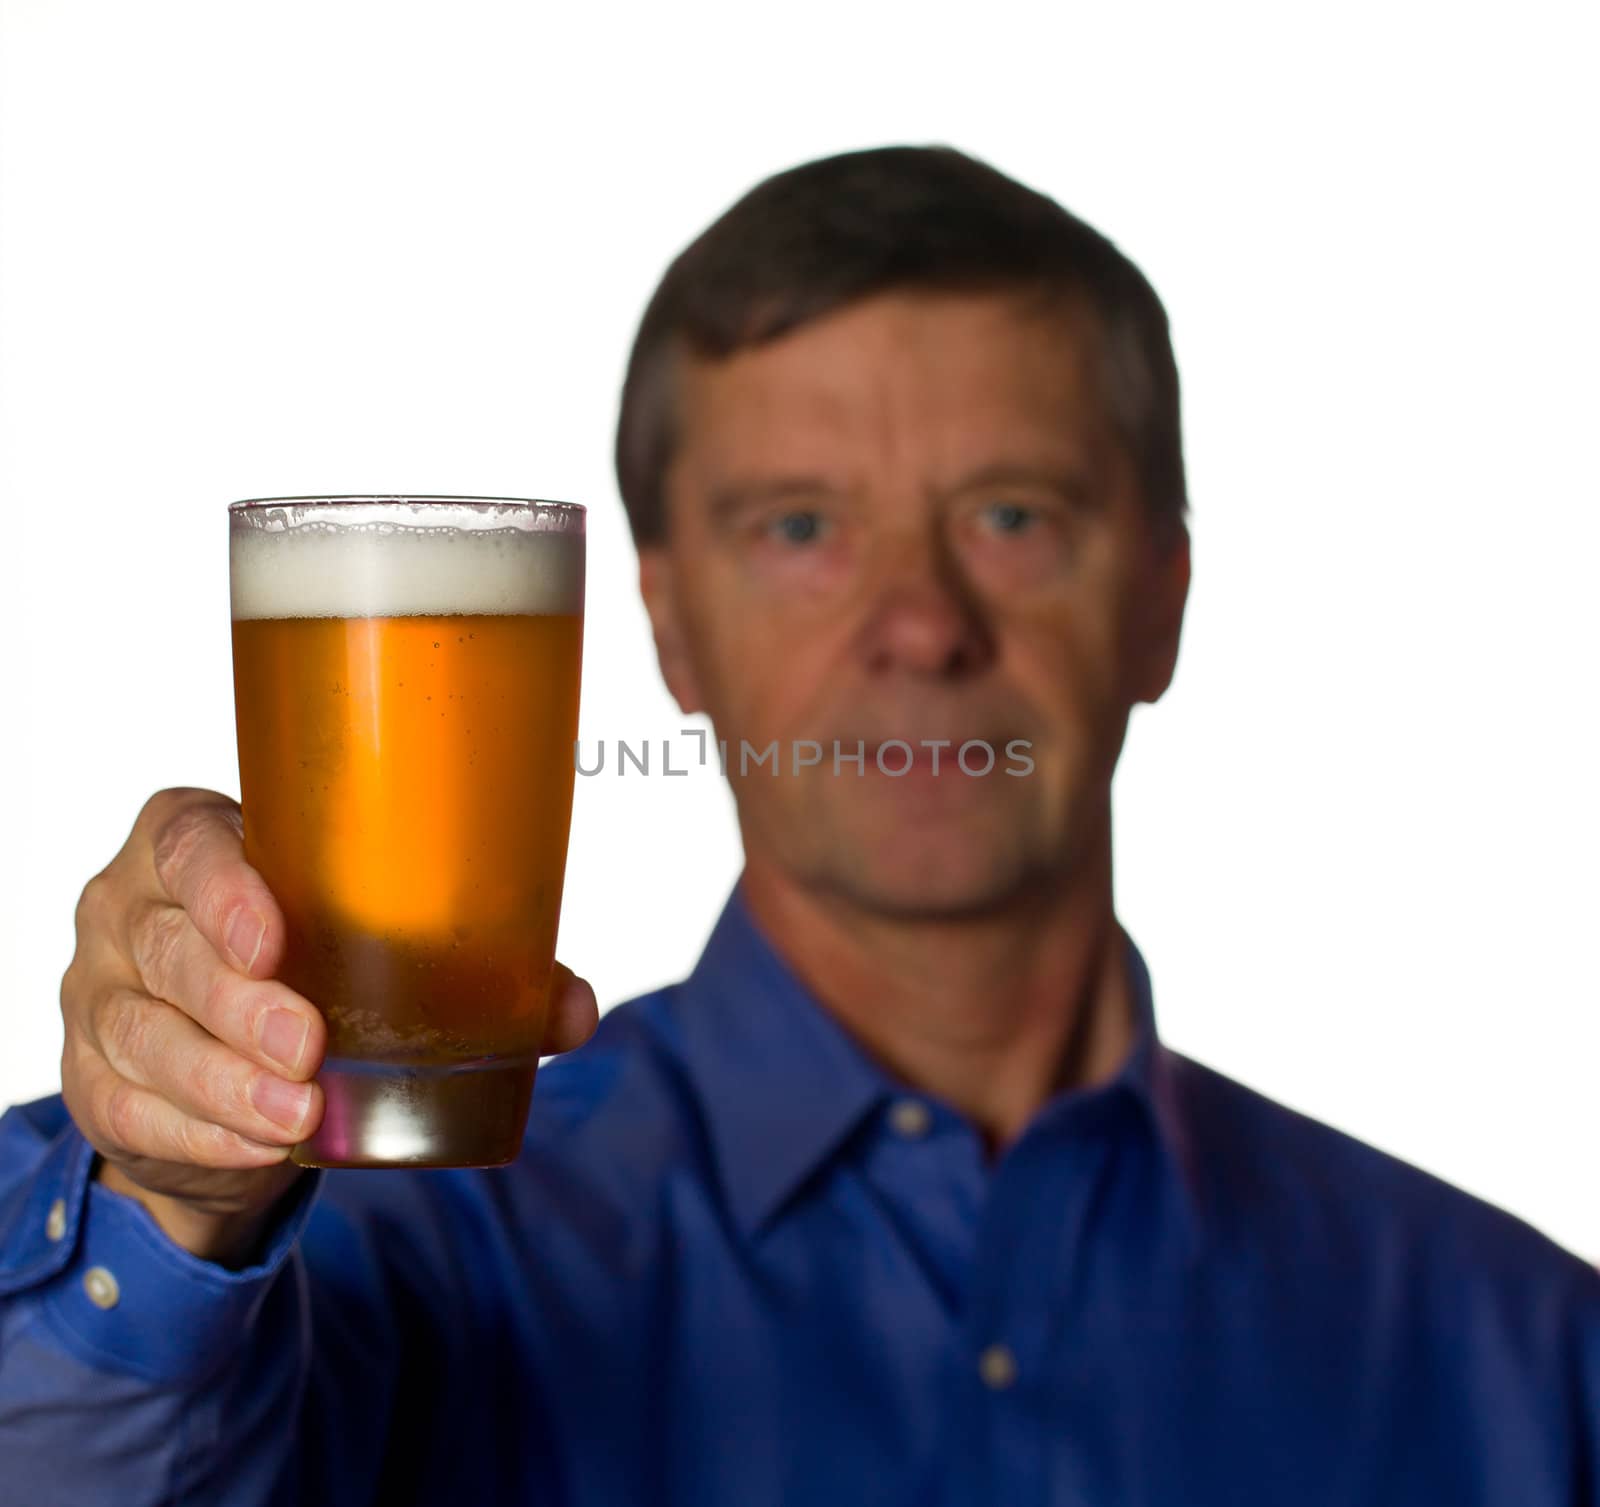 Senior retired male with a cool glass of beer with the man out of focus